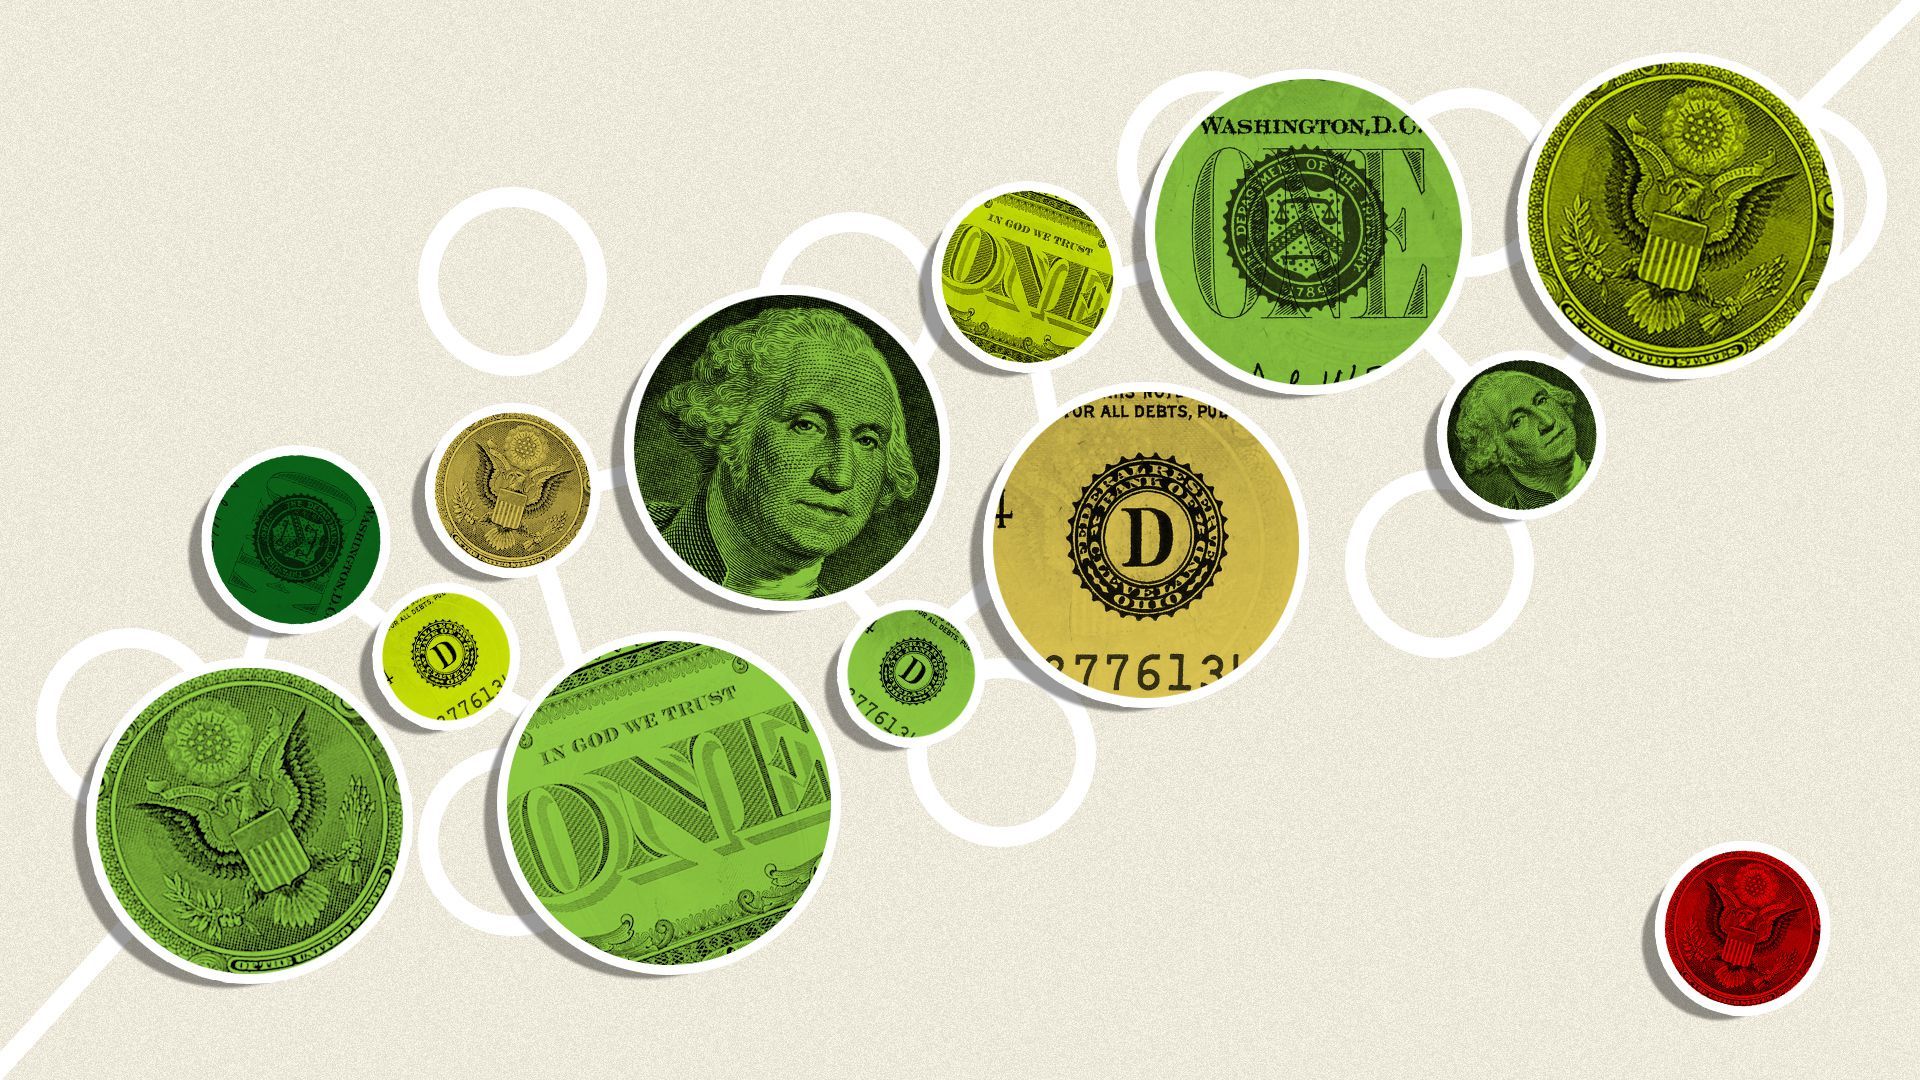 Illustration of a grouping of circles with dollar bill imagery trending upward with one outlier